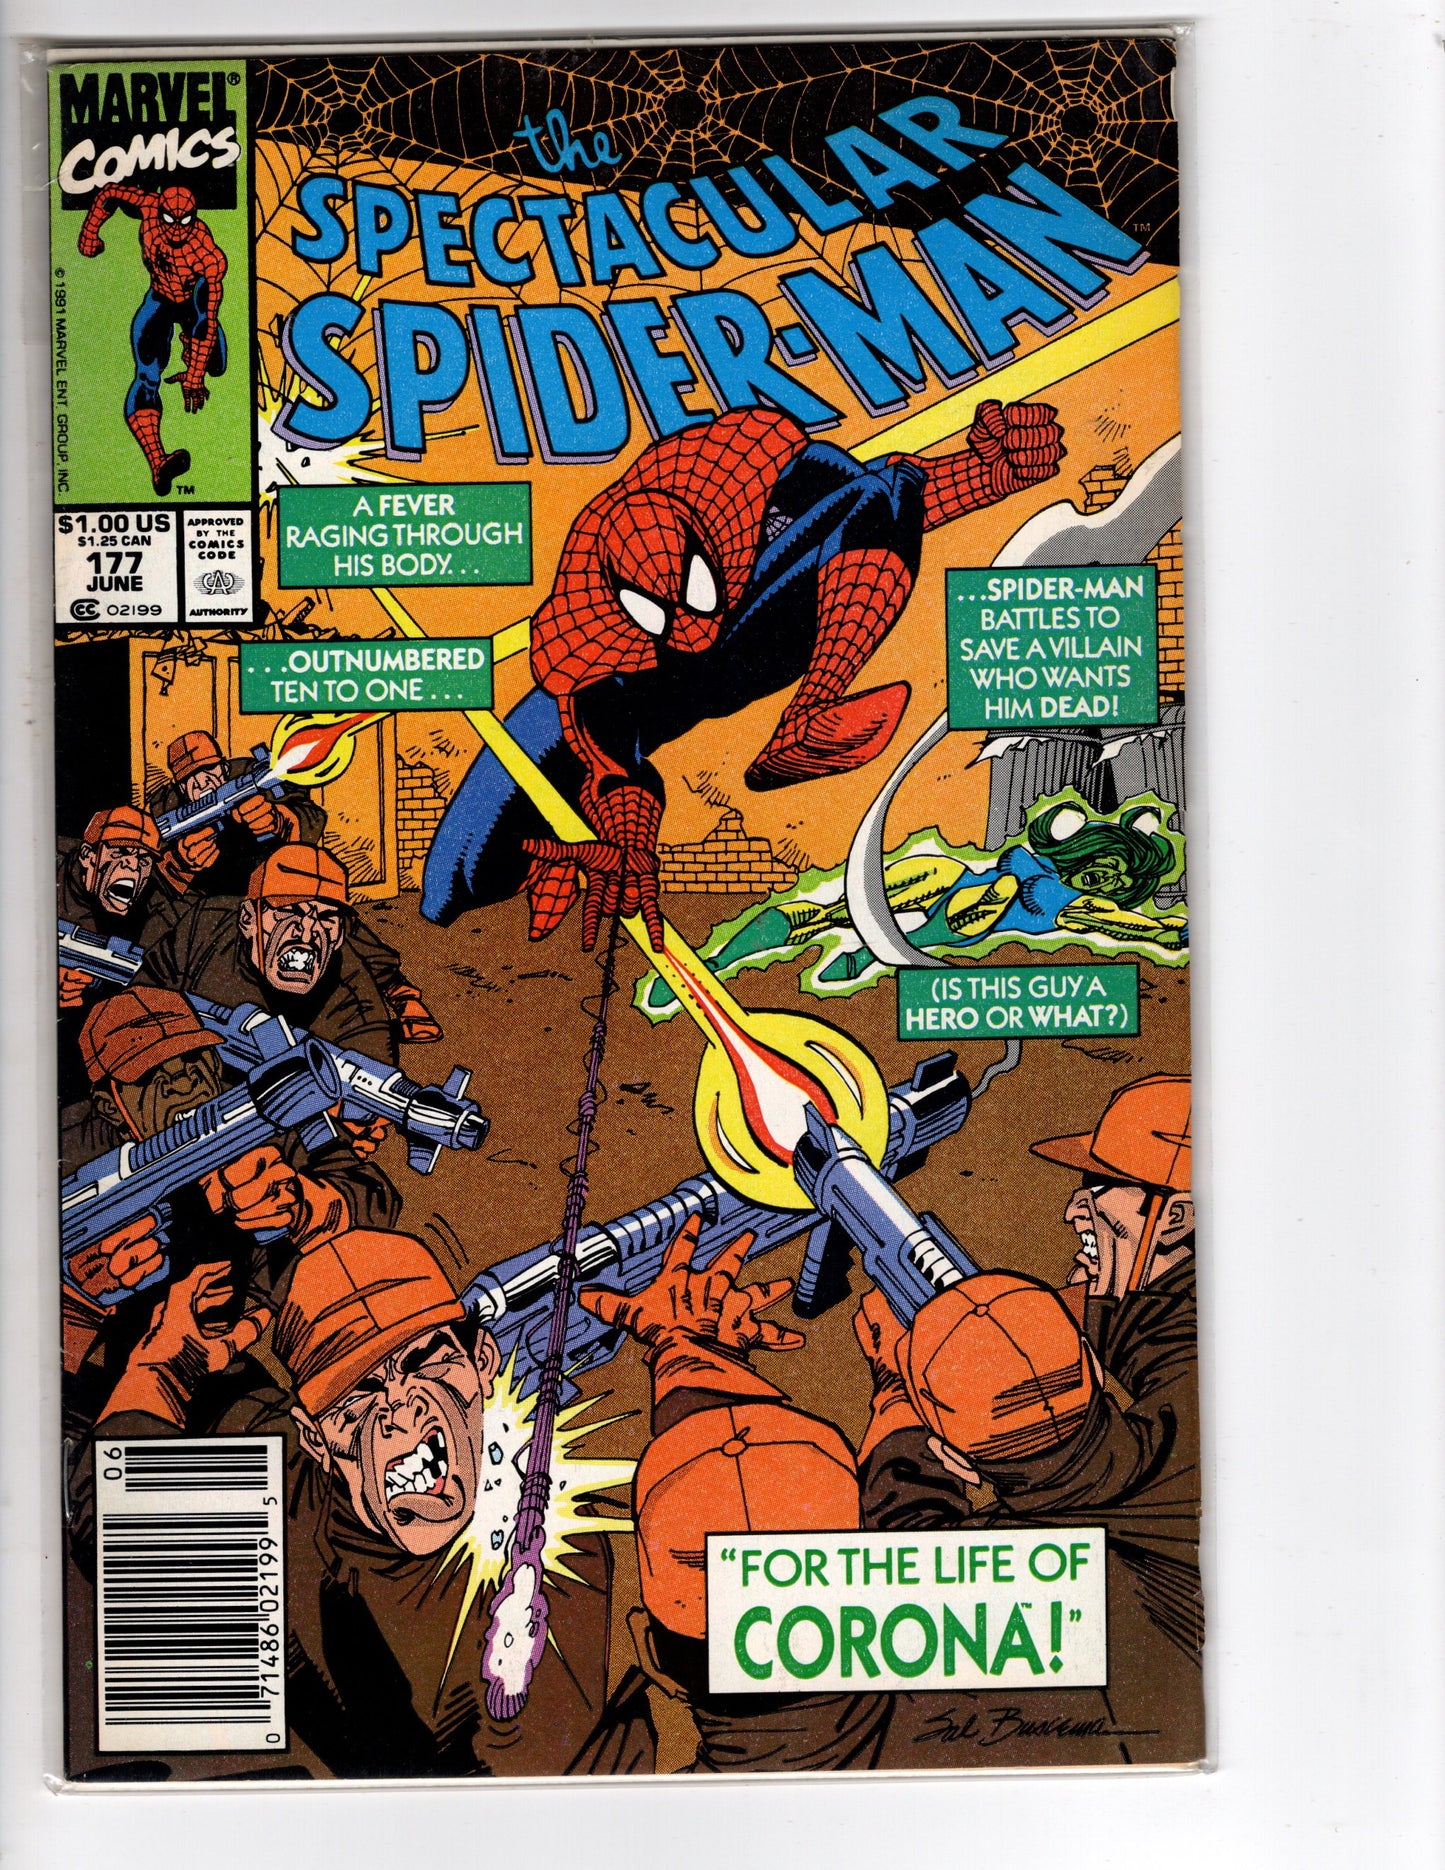 The Spectacular Spider-Man #177